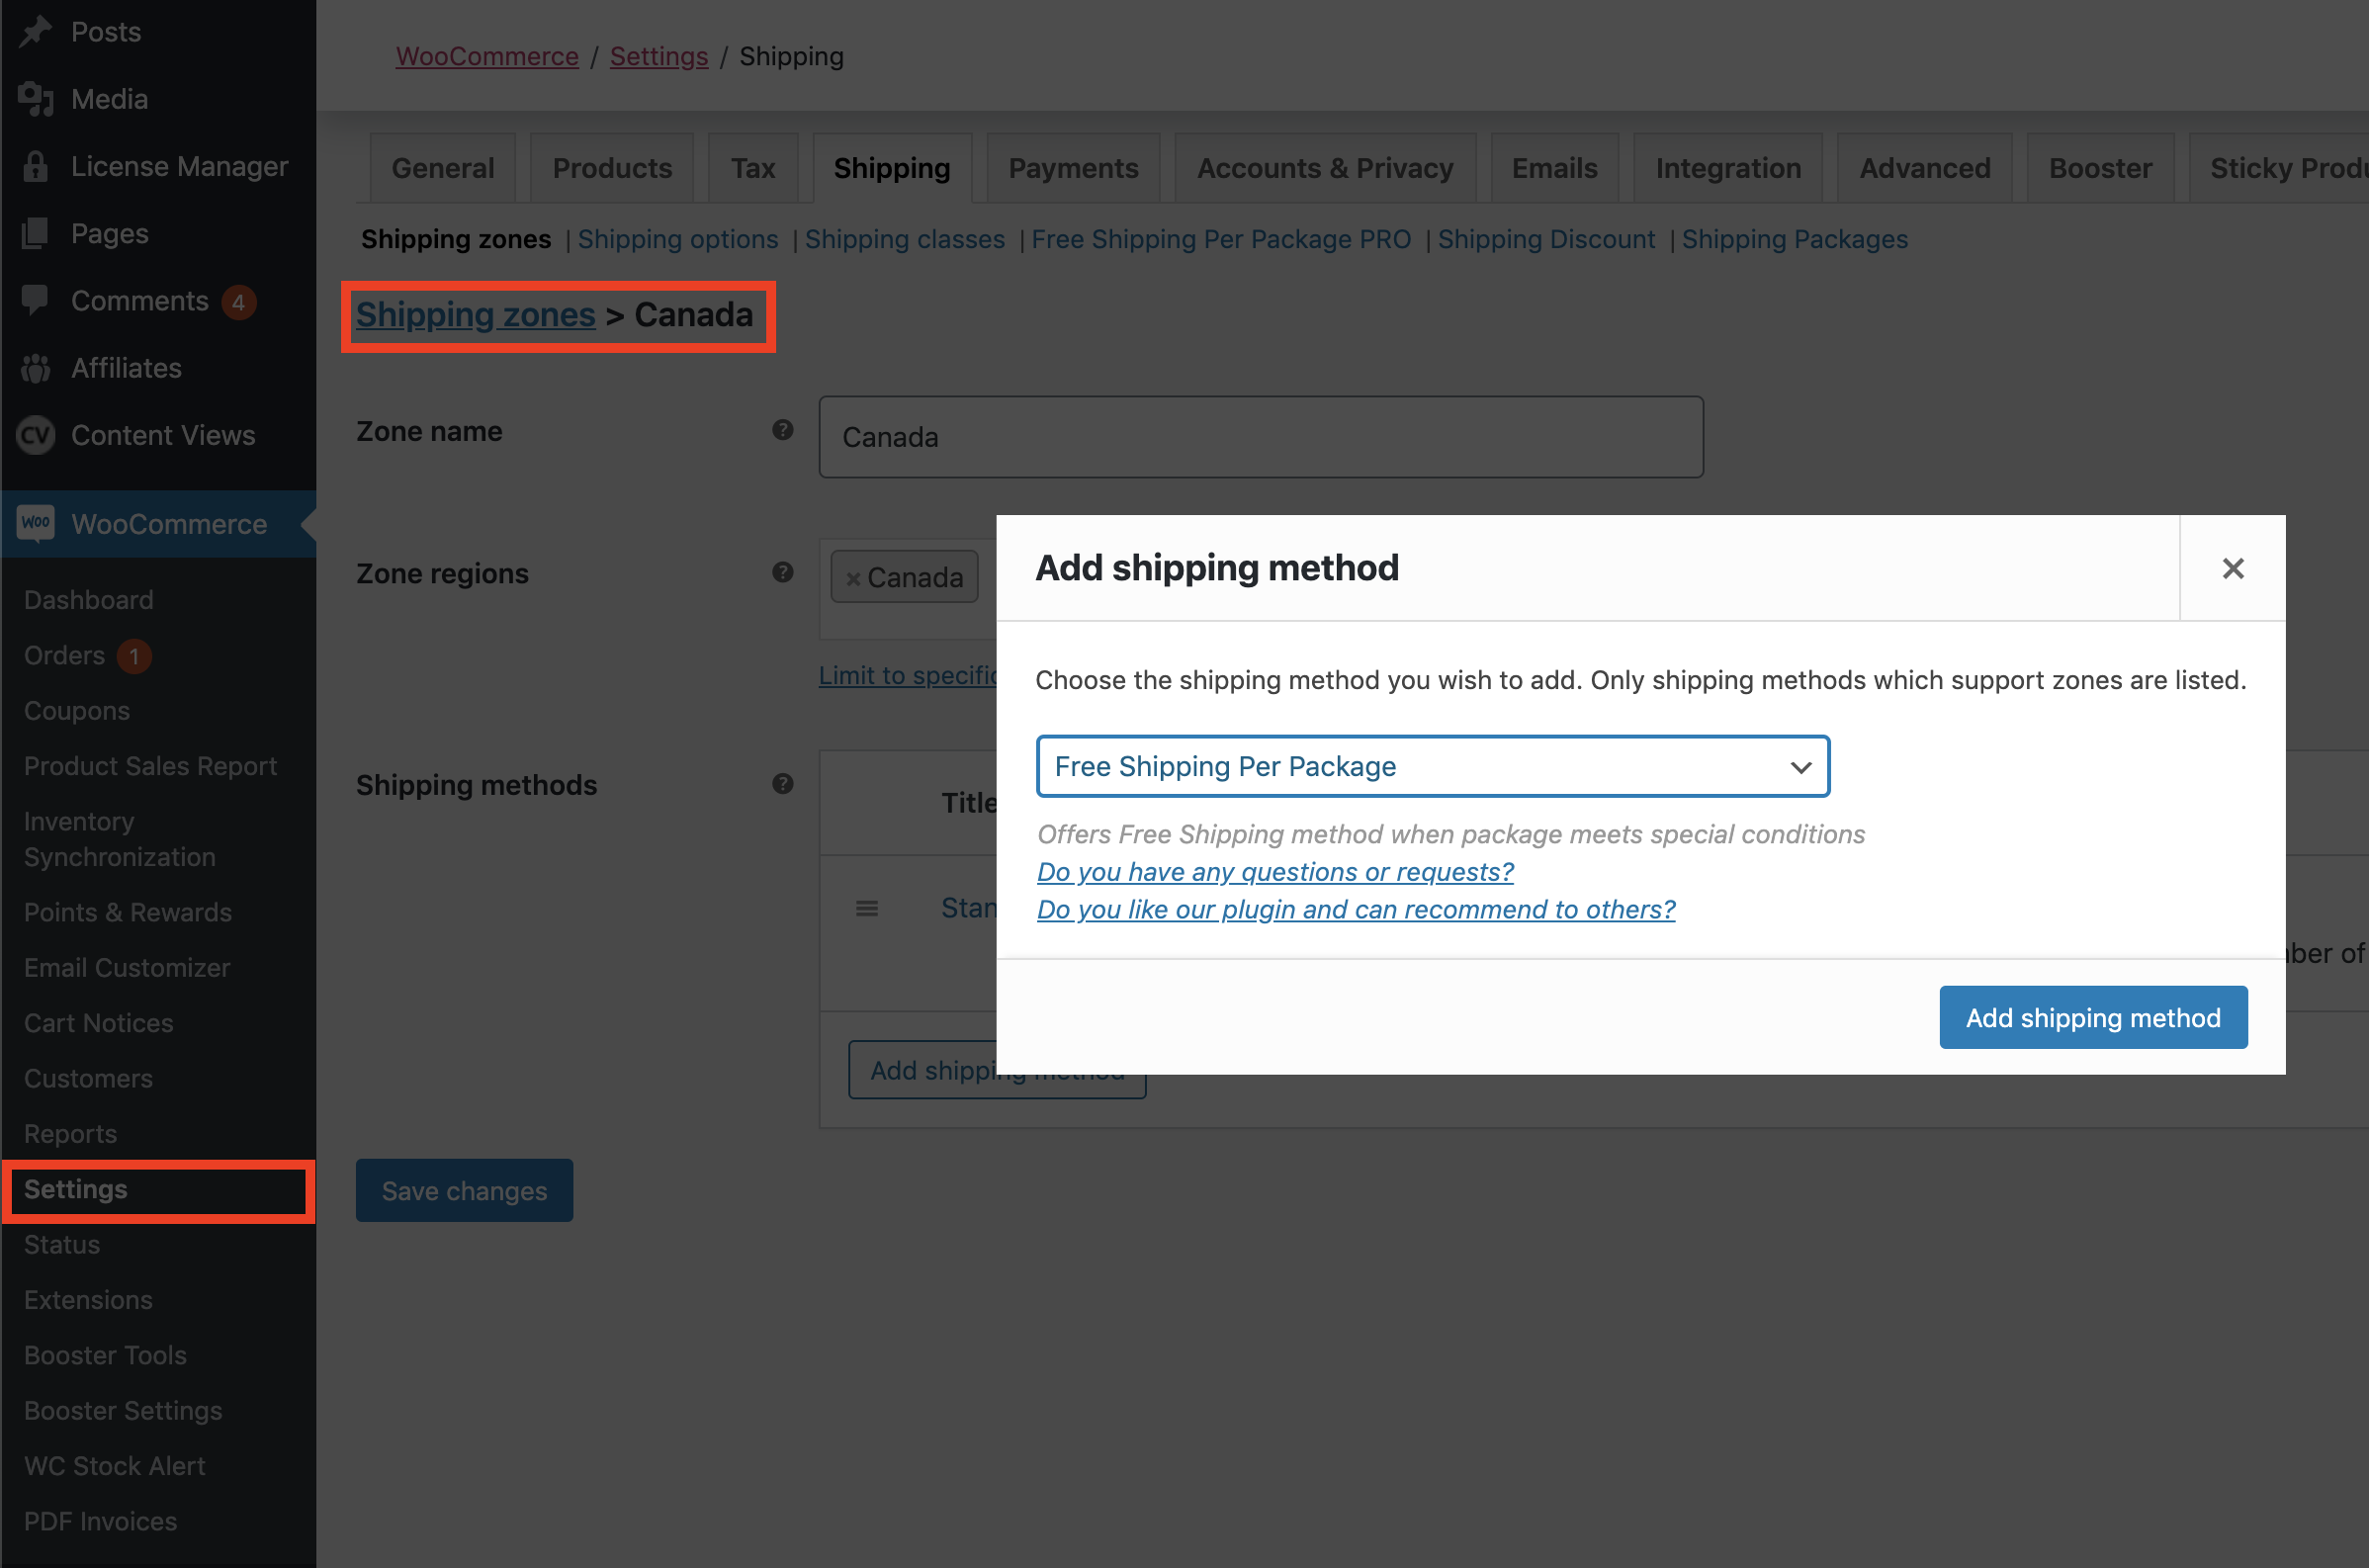 Navigate to WooCommerce -> Settings -> Shipping -> Shipping Zones and then Select Edit on any of the Shipping Zones, then hit Add Shipping Method inside of it and choose Free Shipping Per Package and hit Add Shipping Method.